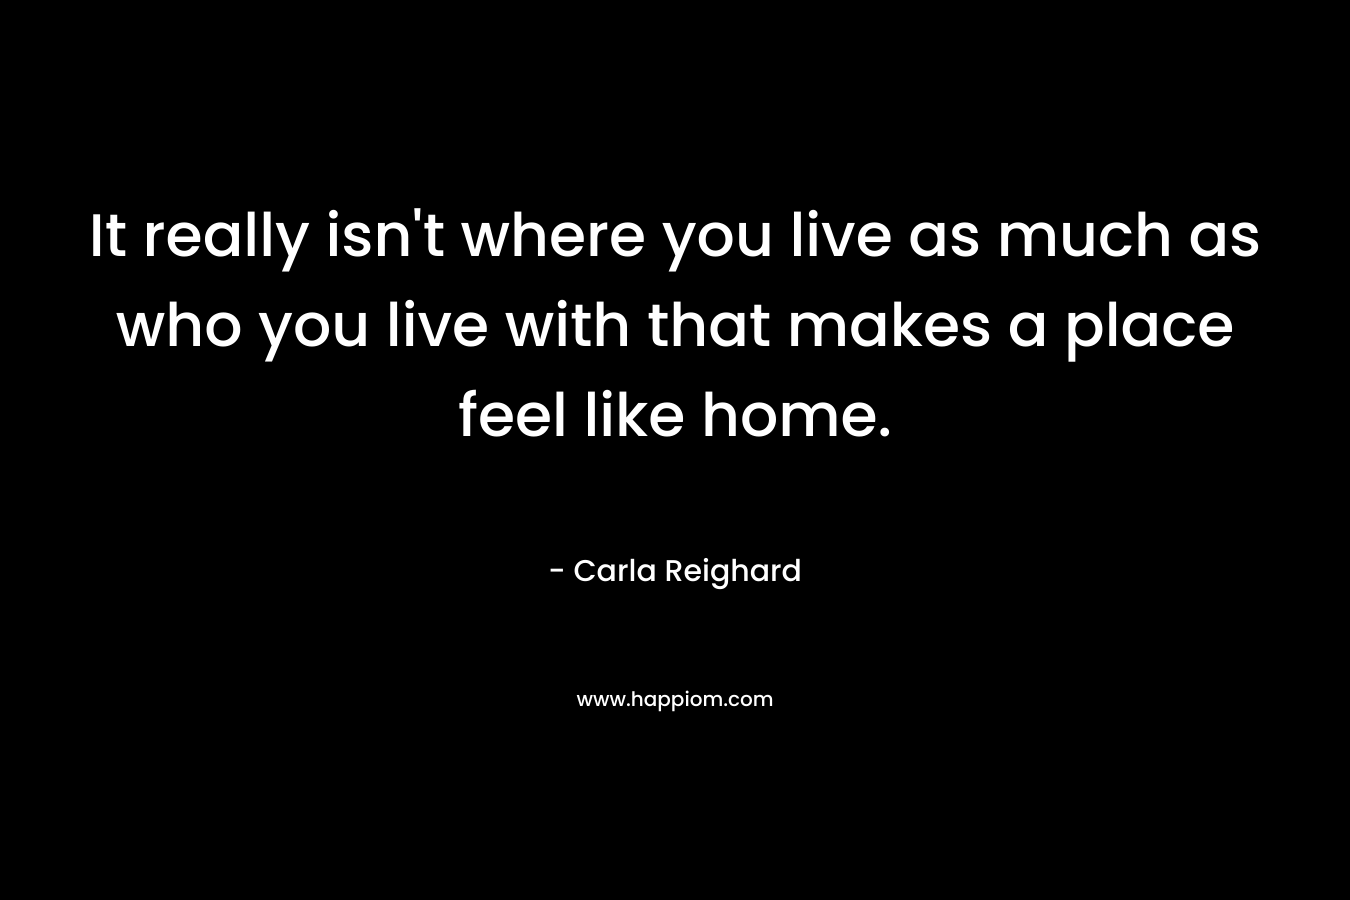 It really isn’t where you live as much as who you live with that makes a place feel like home. – Carla Reighard